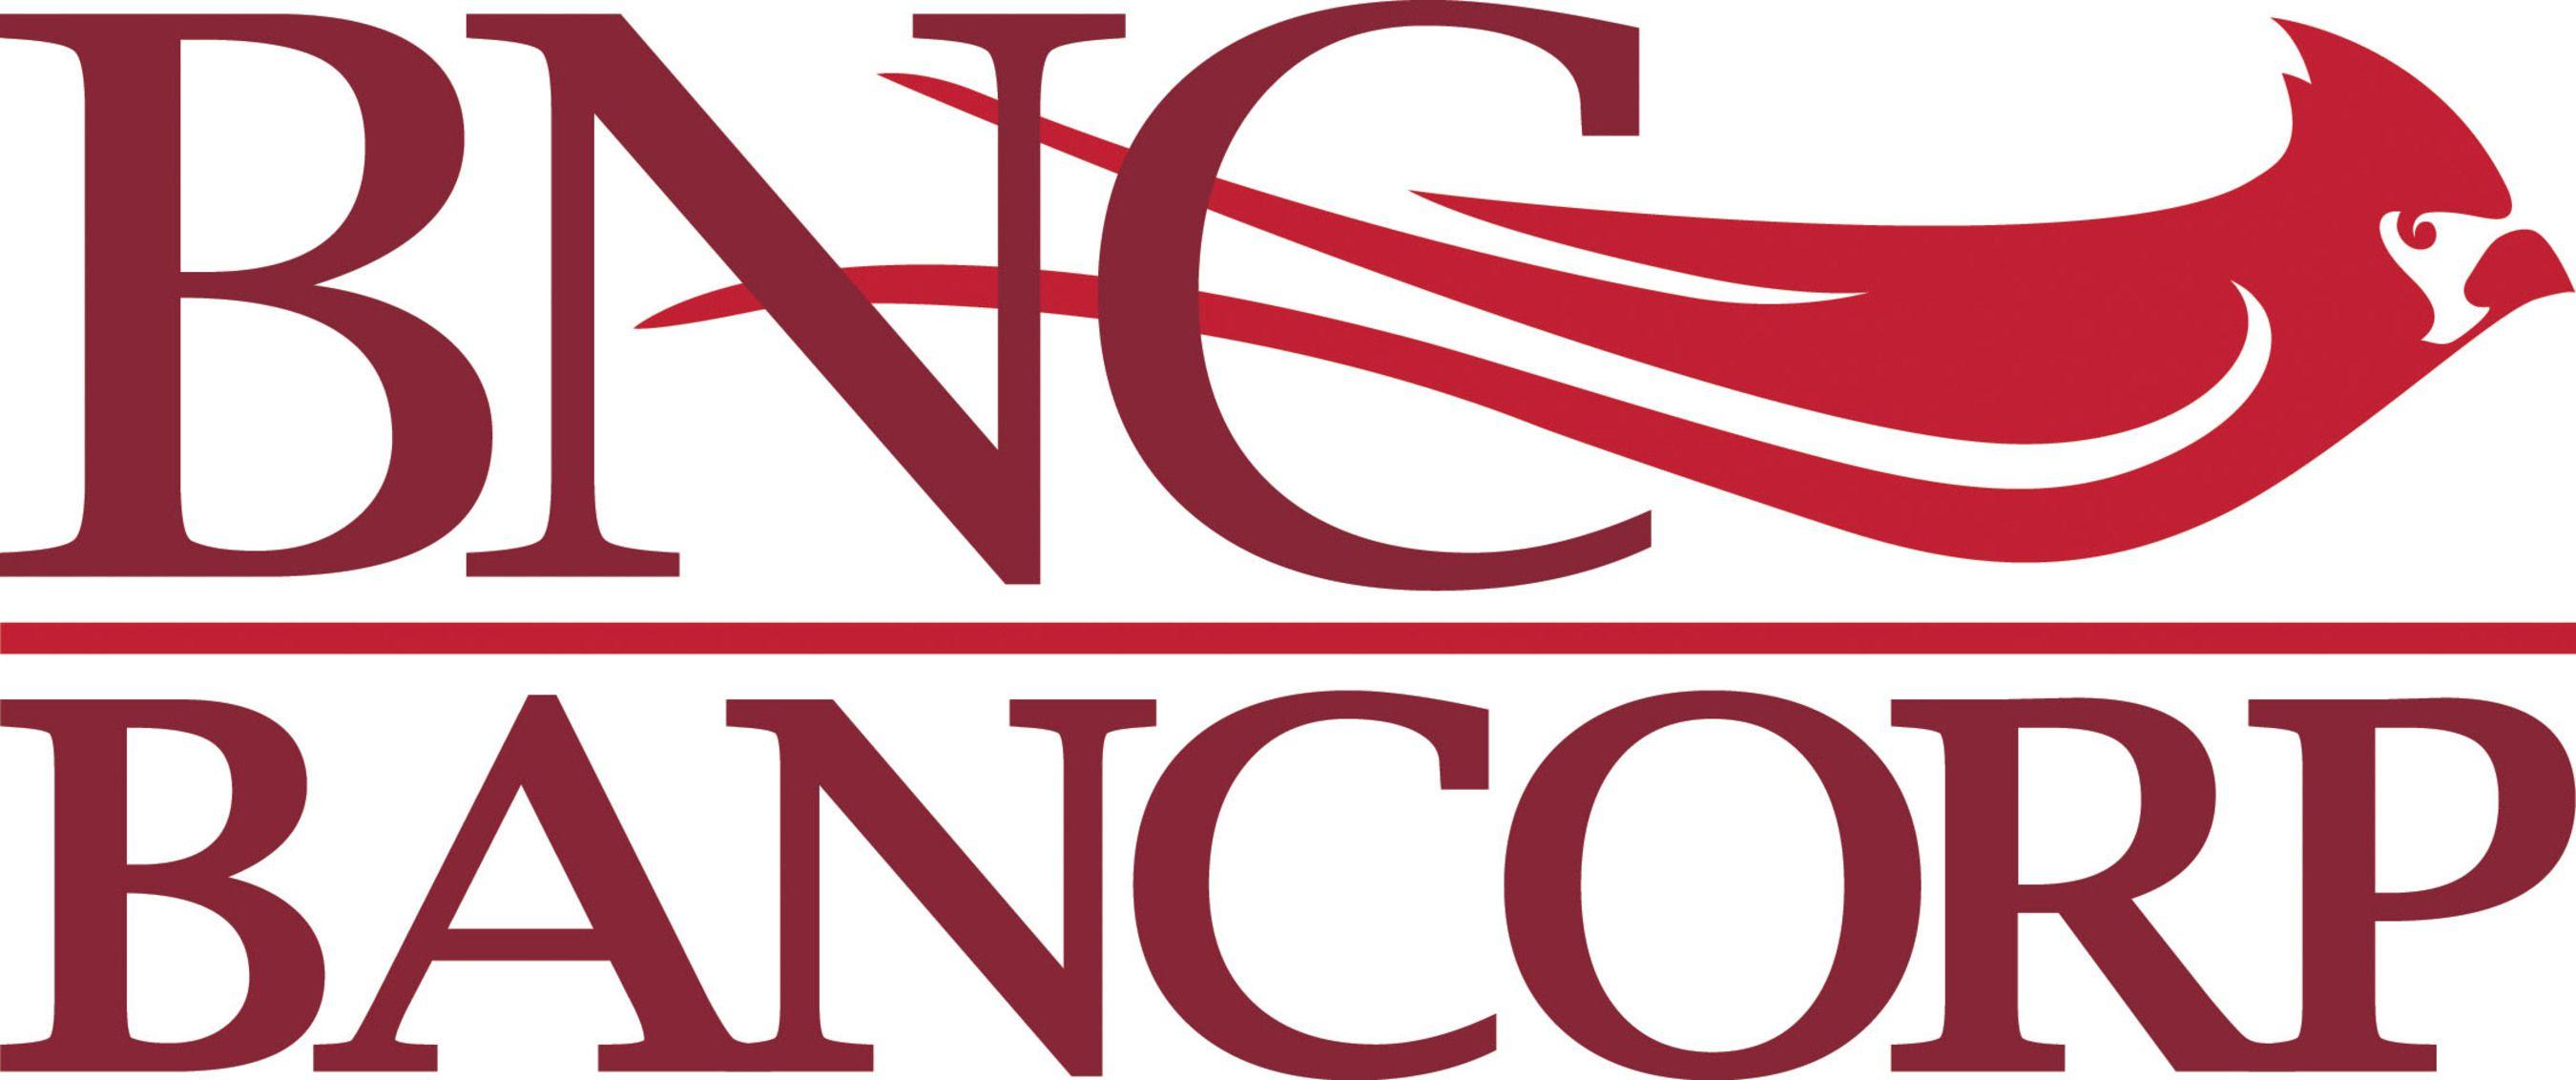 Bancorp Logo - BNC Bancorp Announces Receipt of Regulatory Approvals for High Point